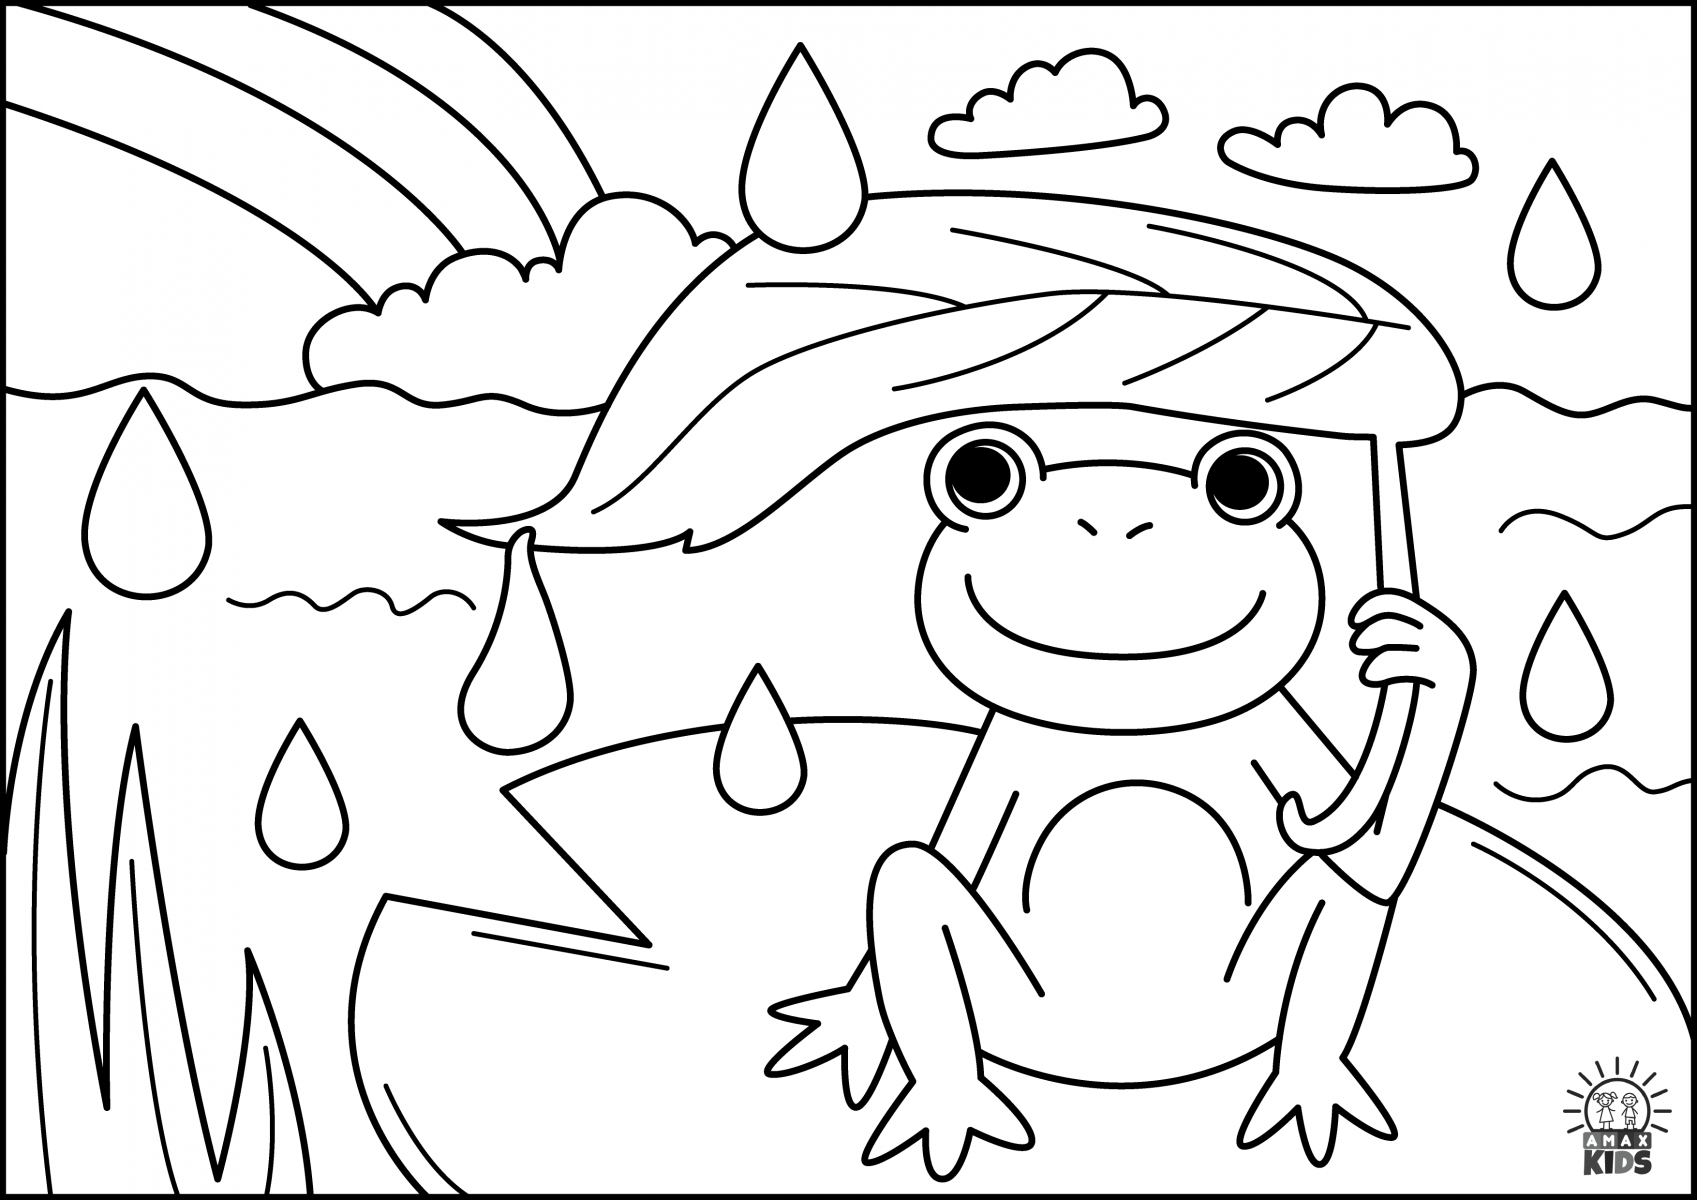 Printable Spring Coloring Pages for Kids   Amax Kids